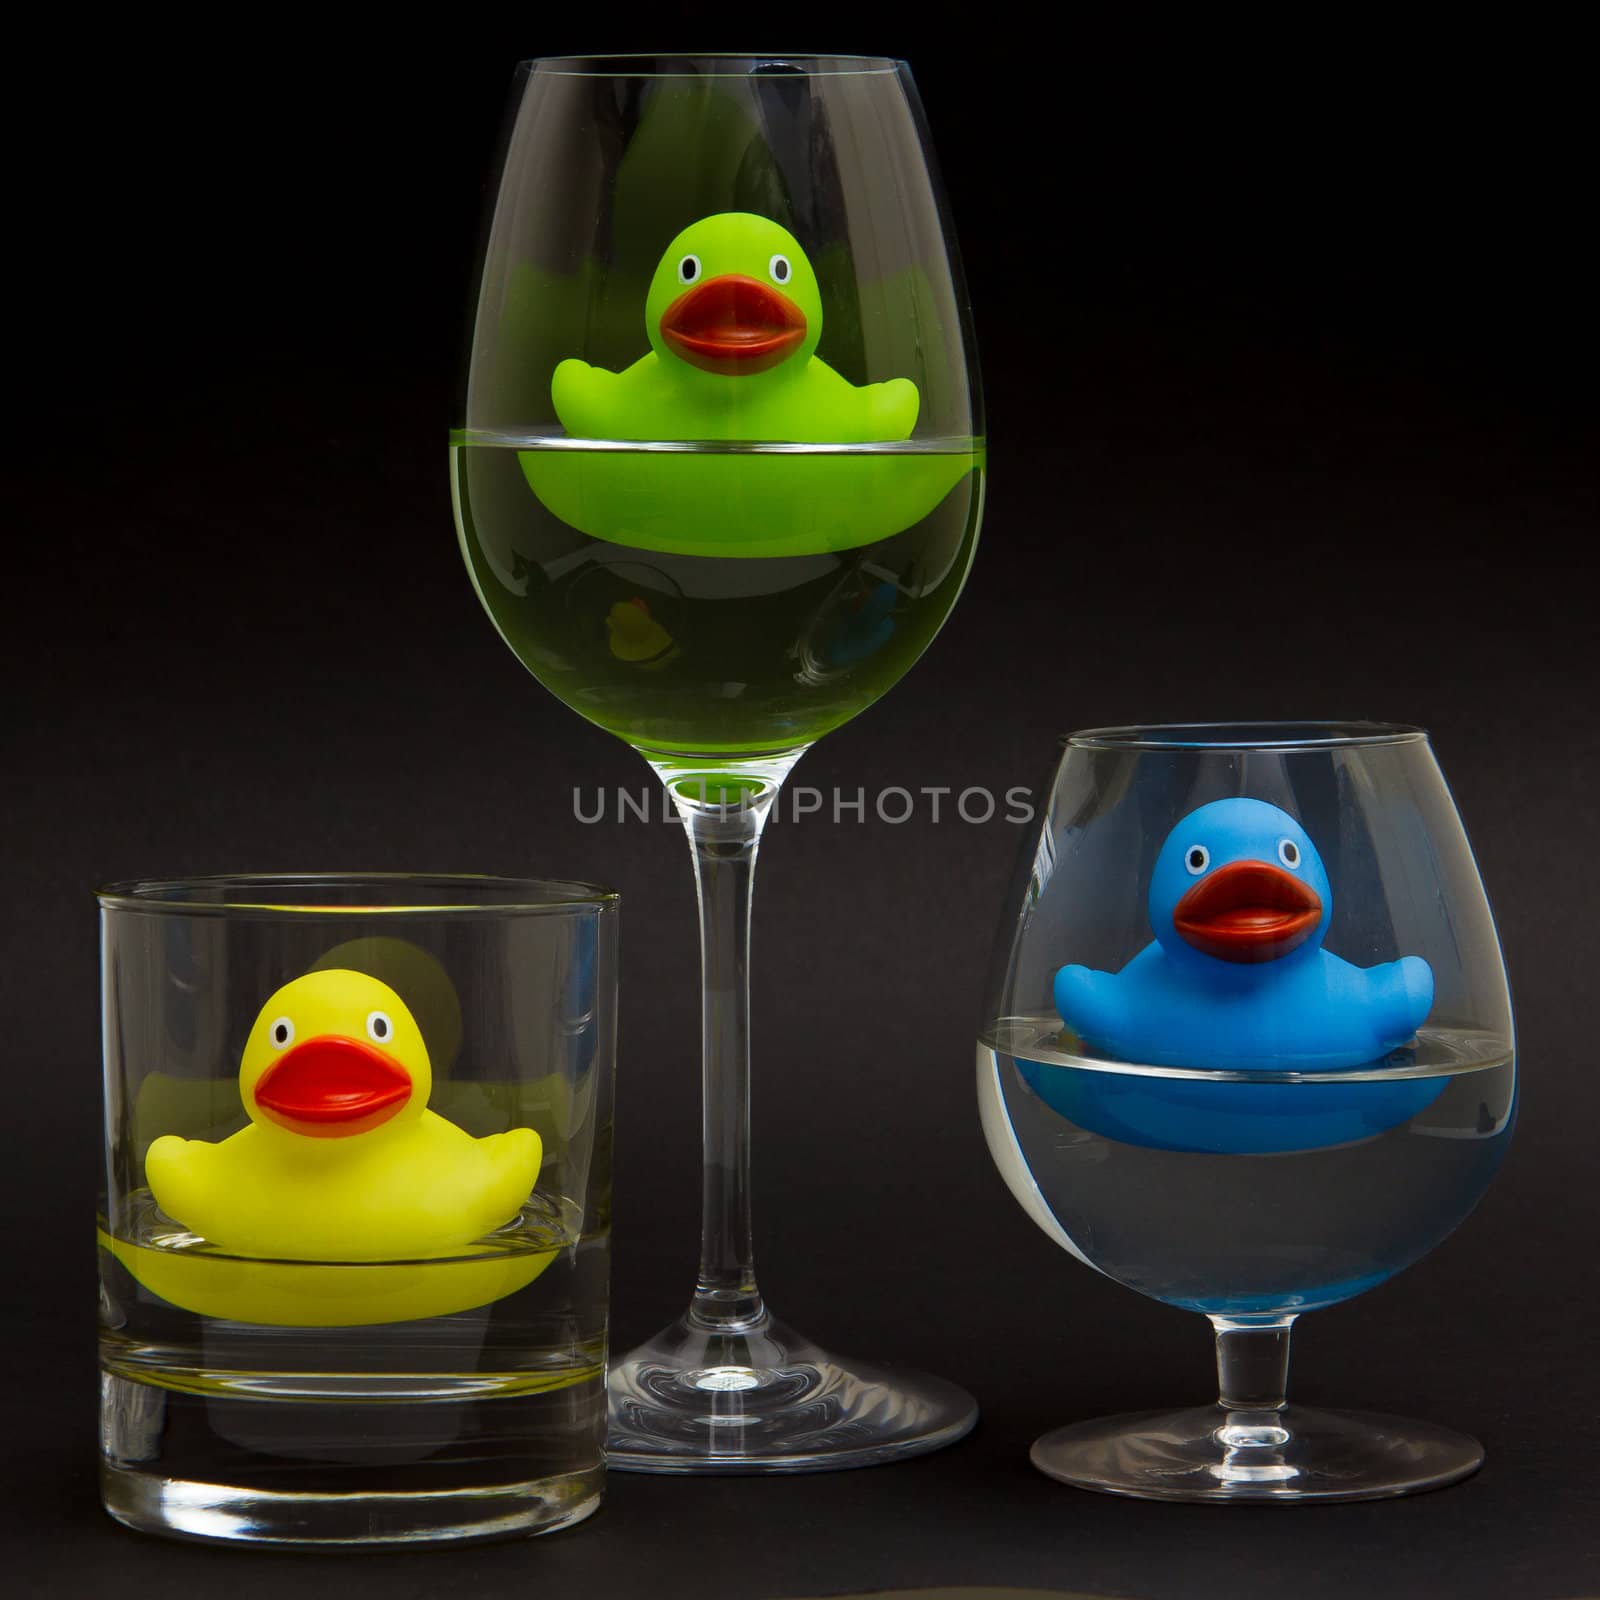 Green, yellow and blue rubber duck in different glasses on a dark background